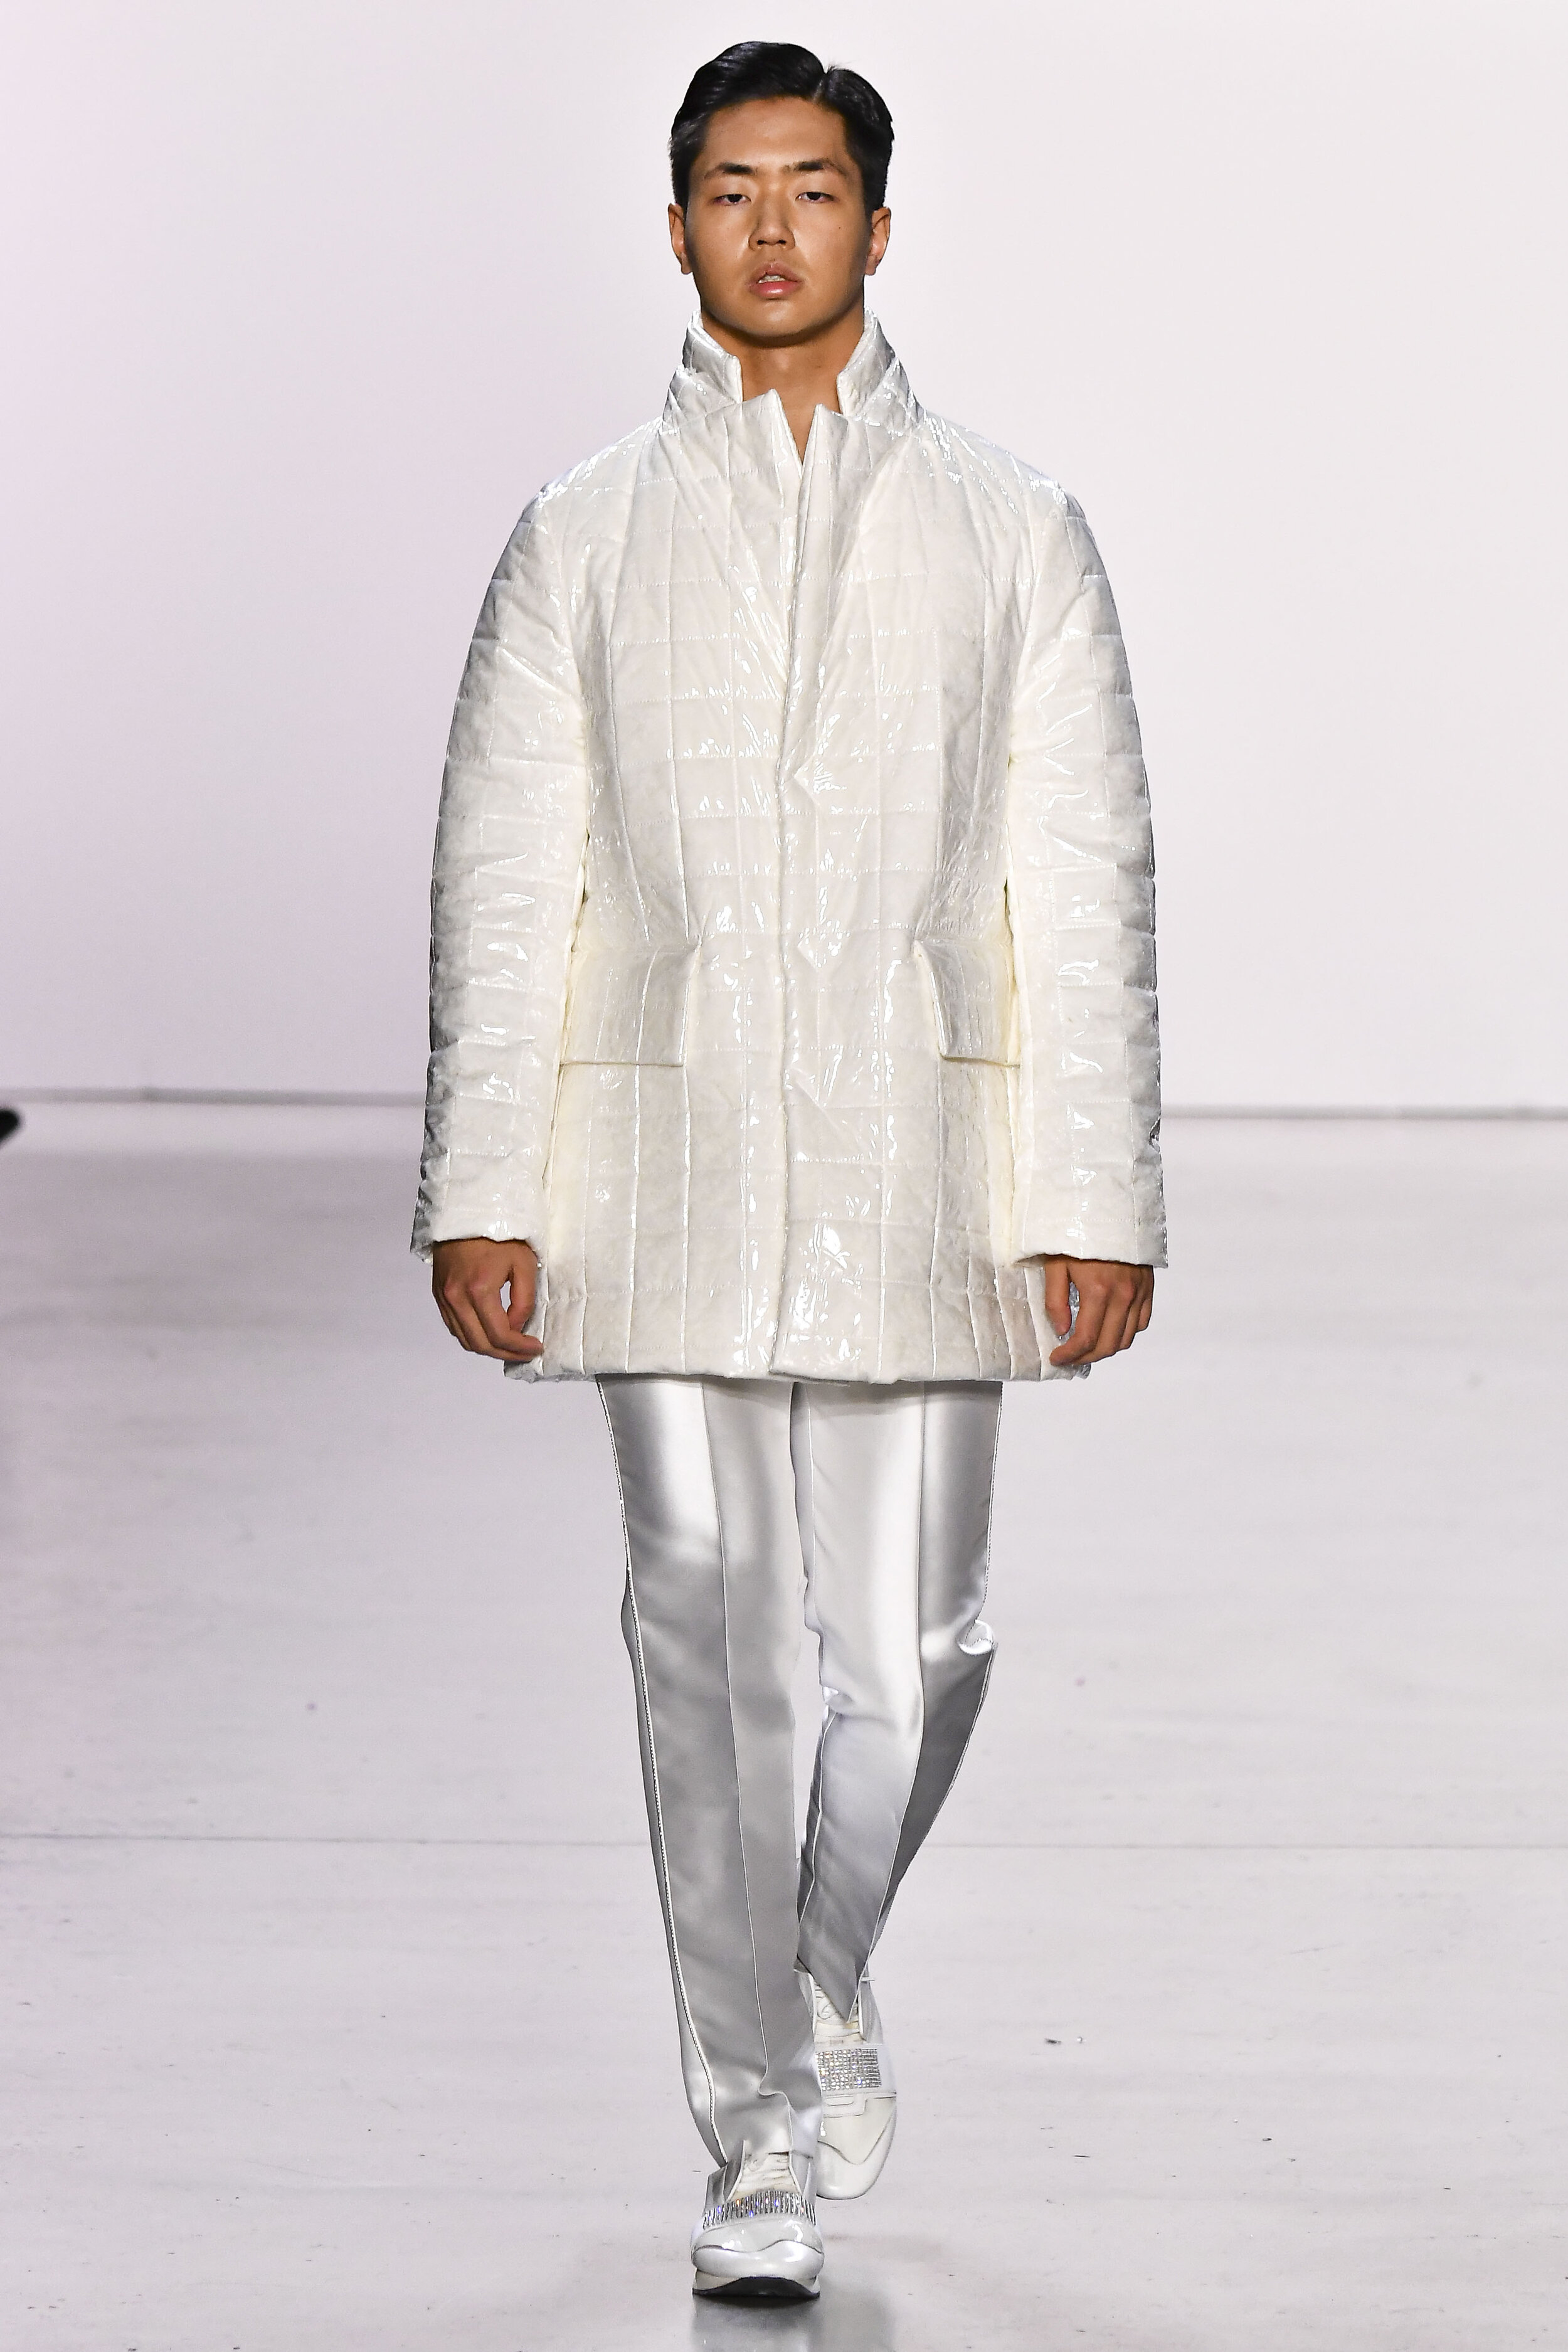 SON JUNG WAN COLLECTION NYFW FALL 2020